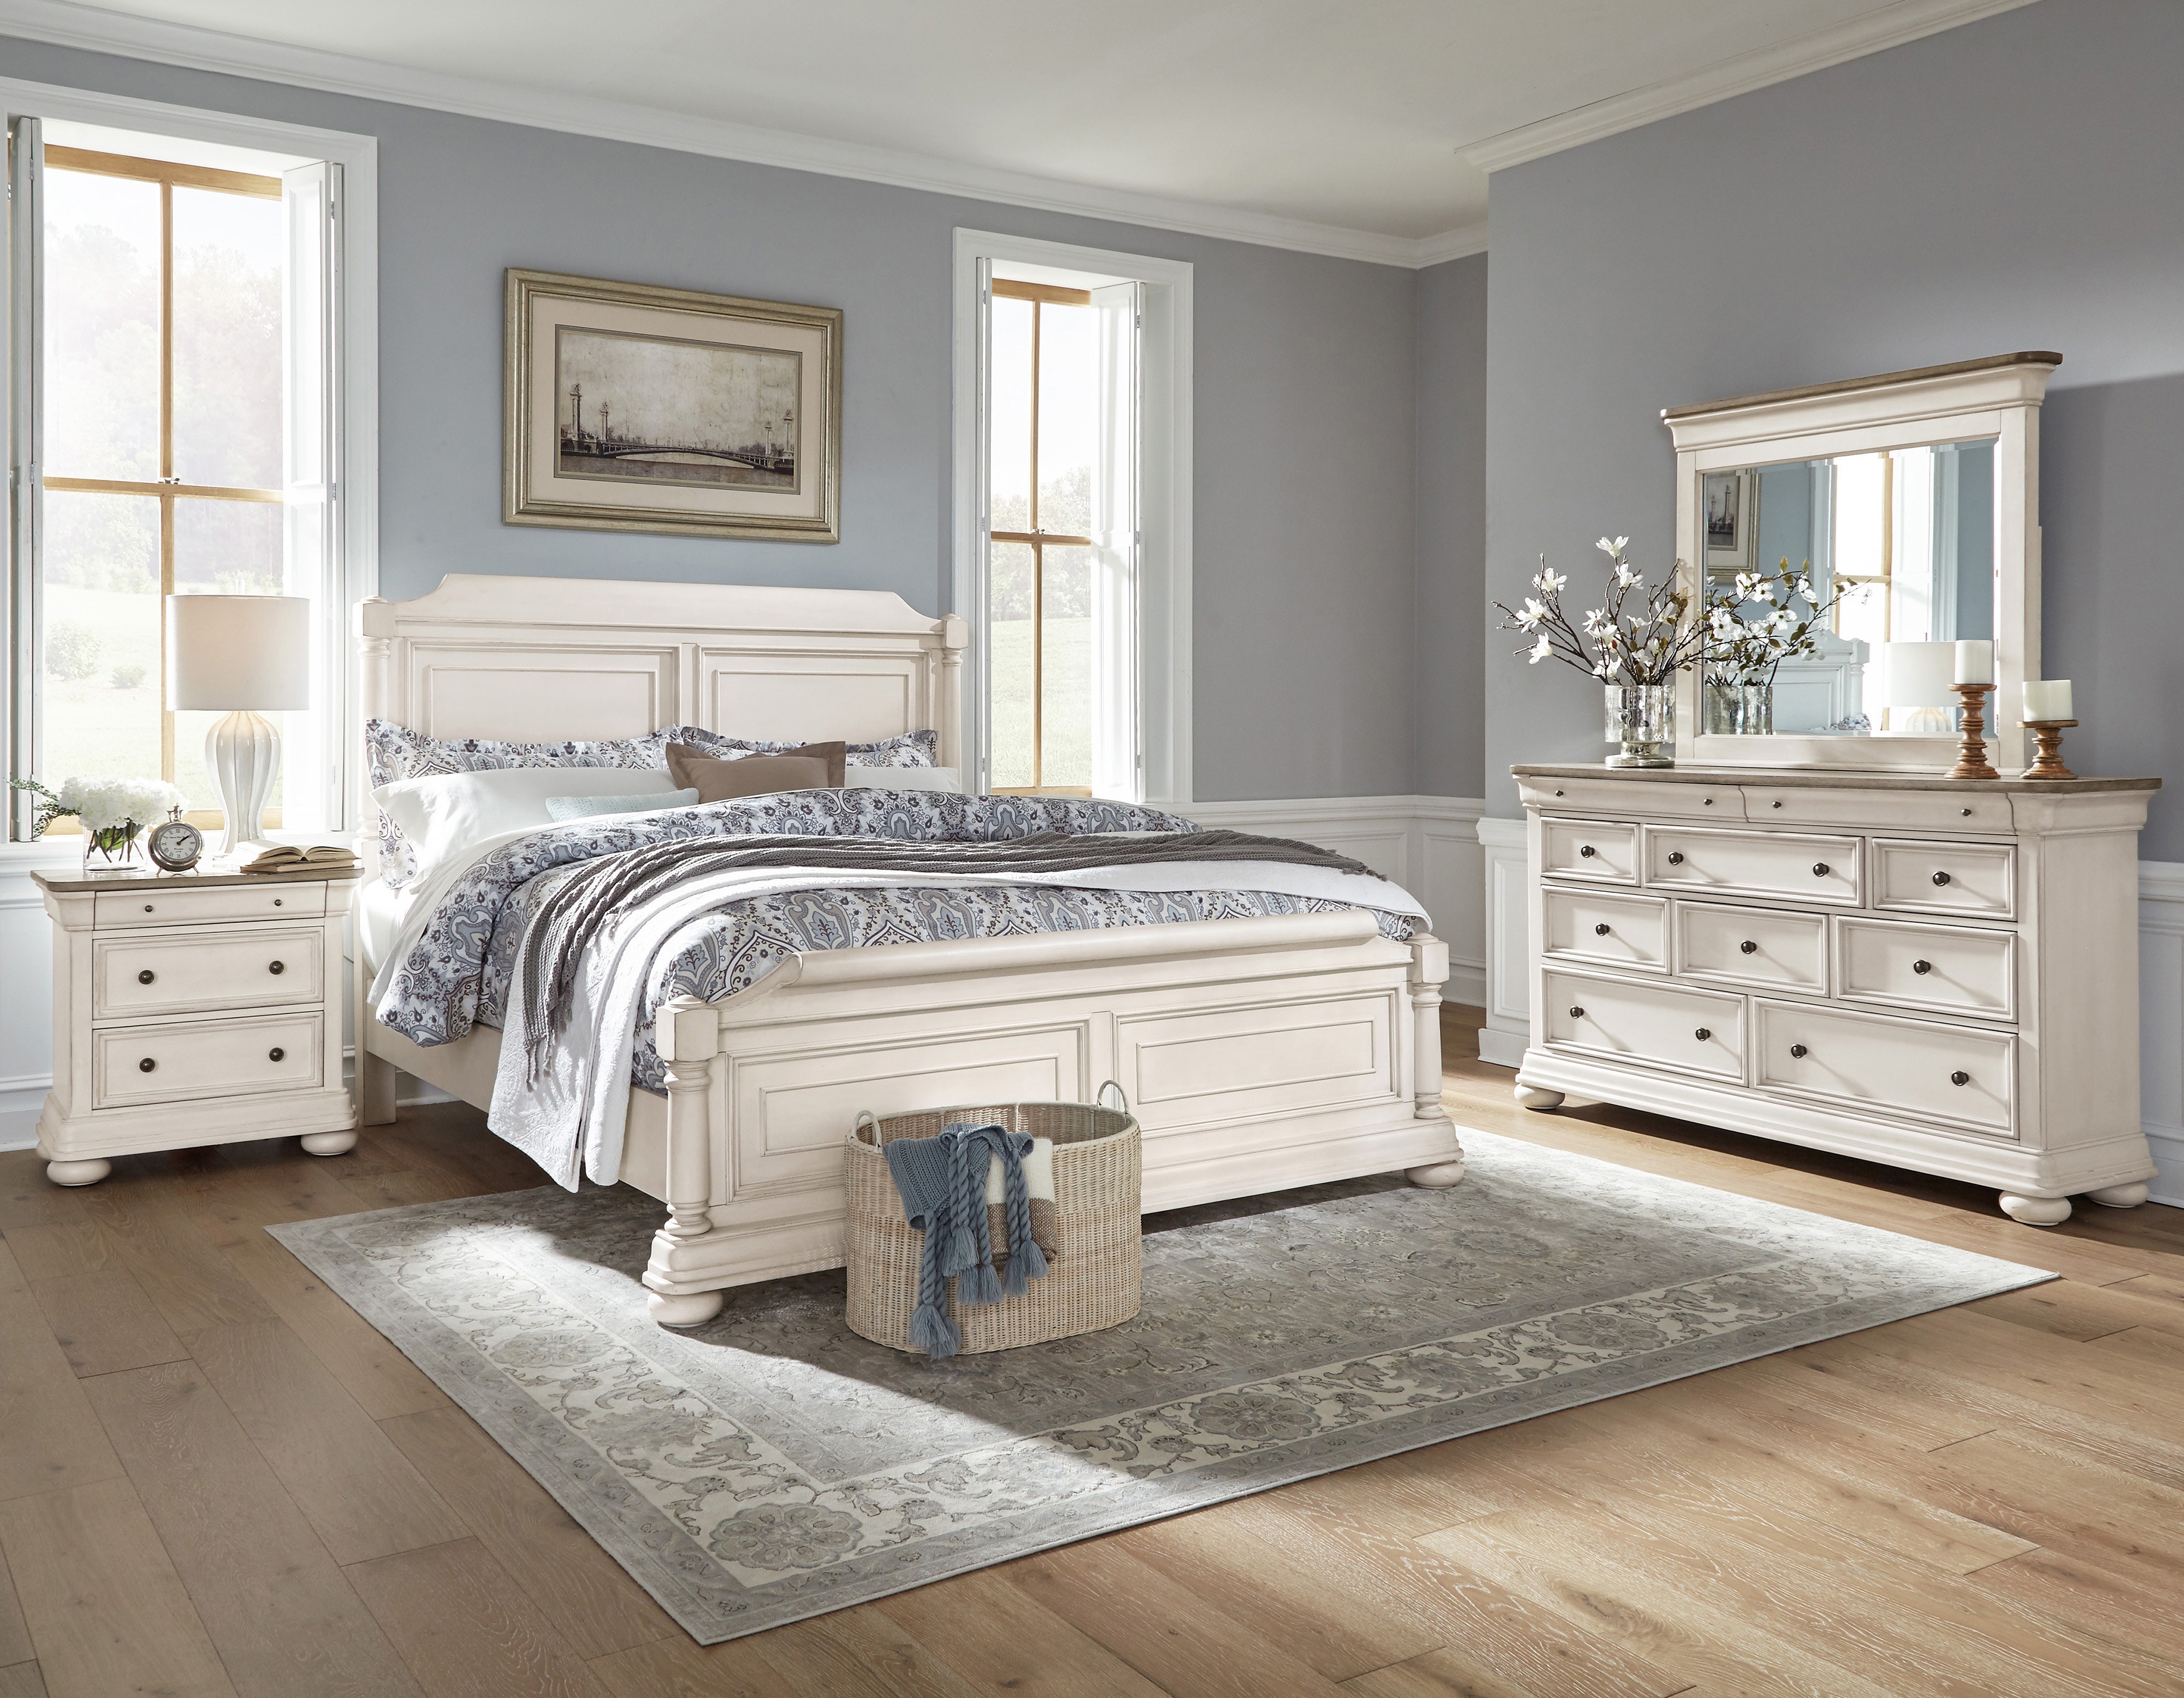  Yuan Tai Louis Phillip King Bed and 4-Piece Sleigh